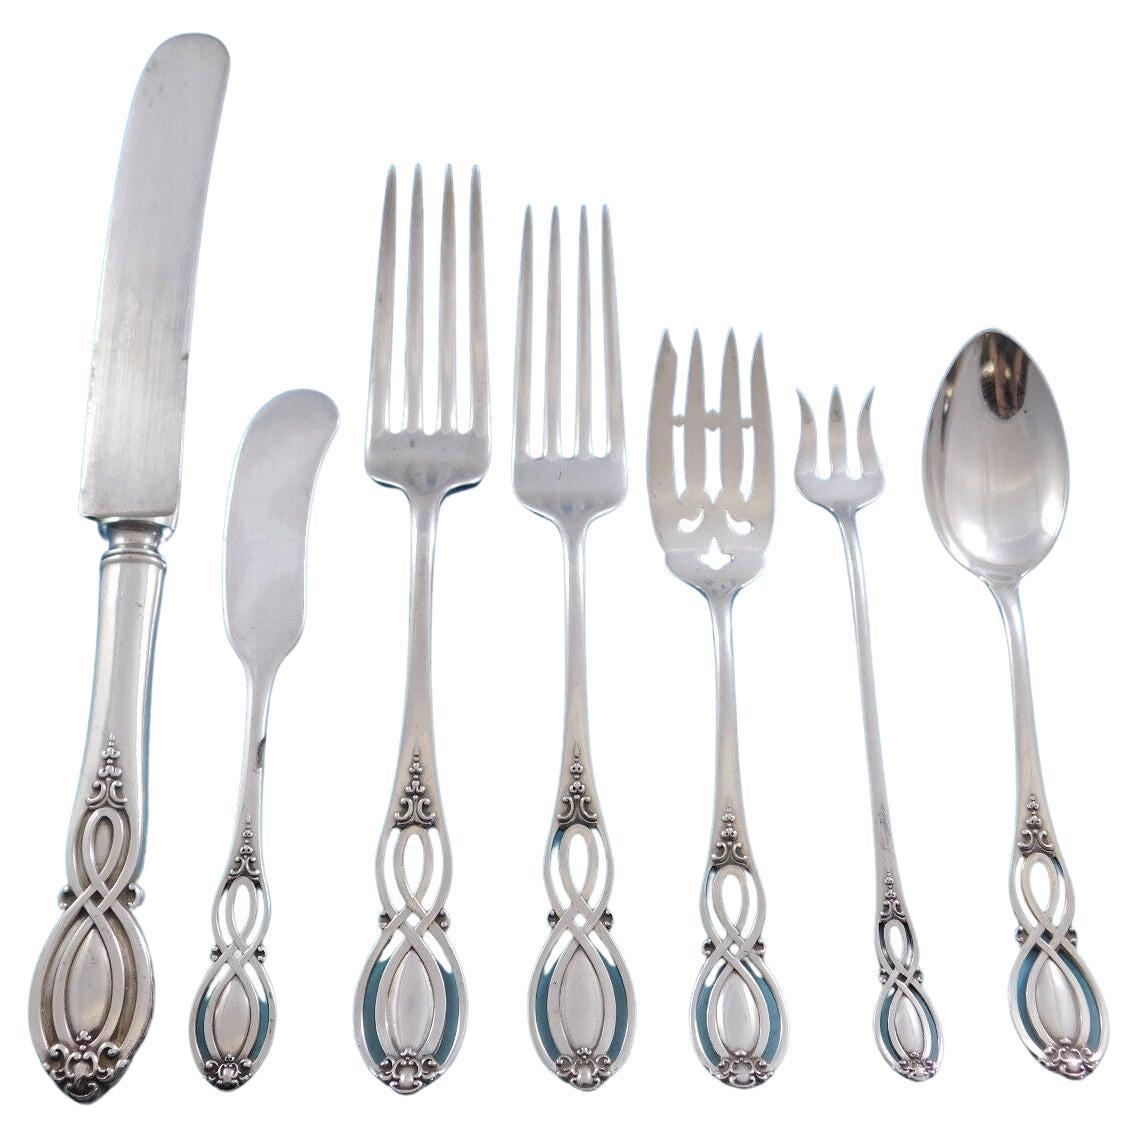 Chippendale Old by Alvin Sterling Silver Flatware Set for 6 Service 46 Pc Dinner For Sale